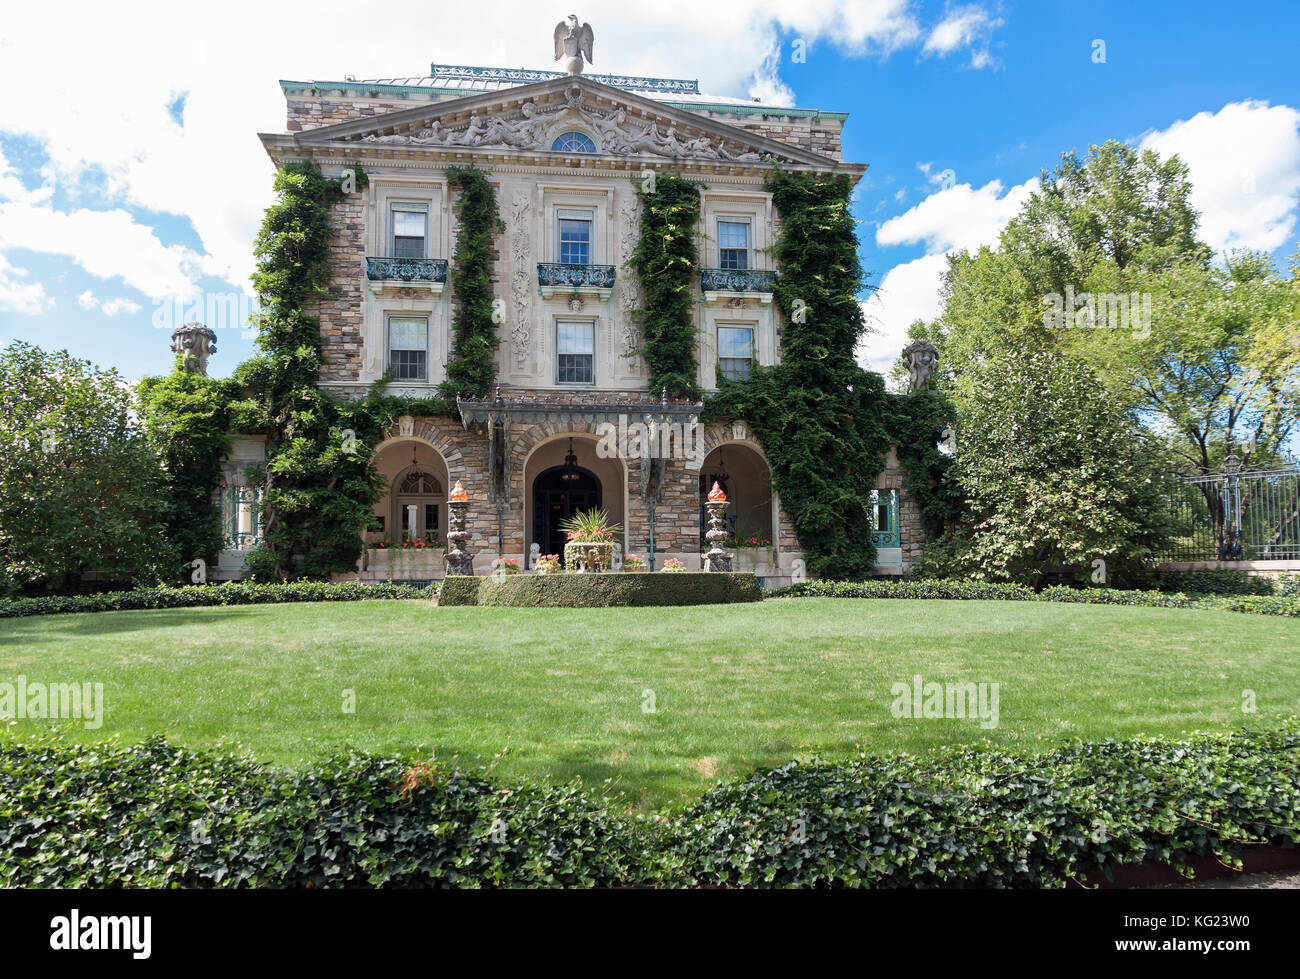 Front entrance of Kykuit, the Rockefeller estate house, located in Pocantico Hills, Sleepy Hollow, Westchester County, New York. Stock Photo